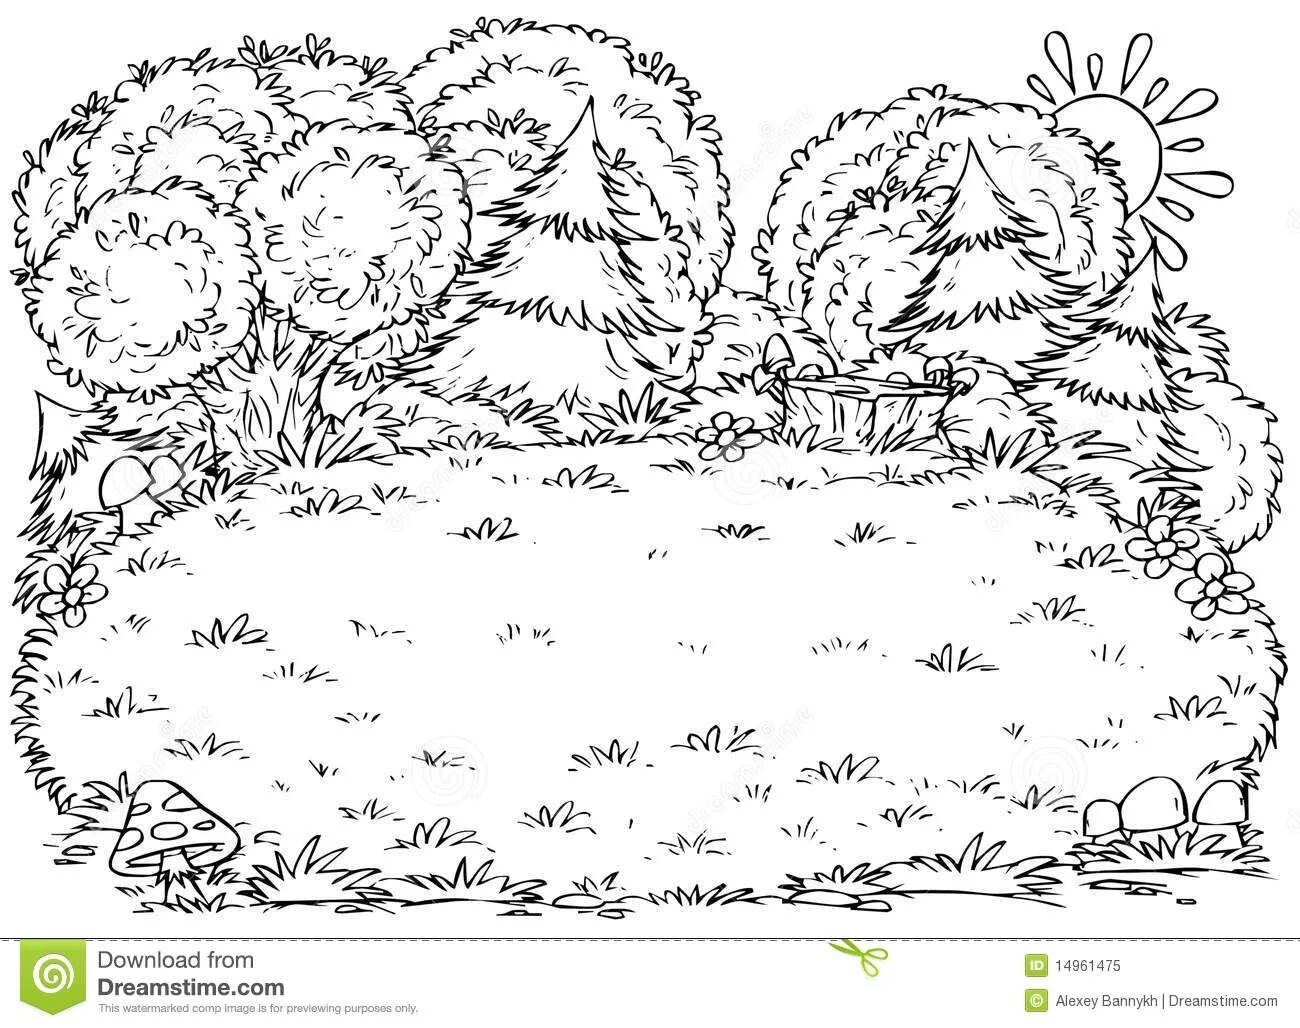 Coloring page mysterious forest